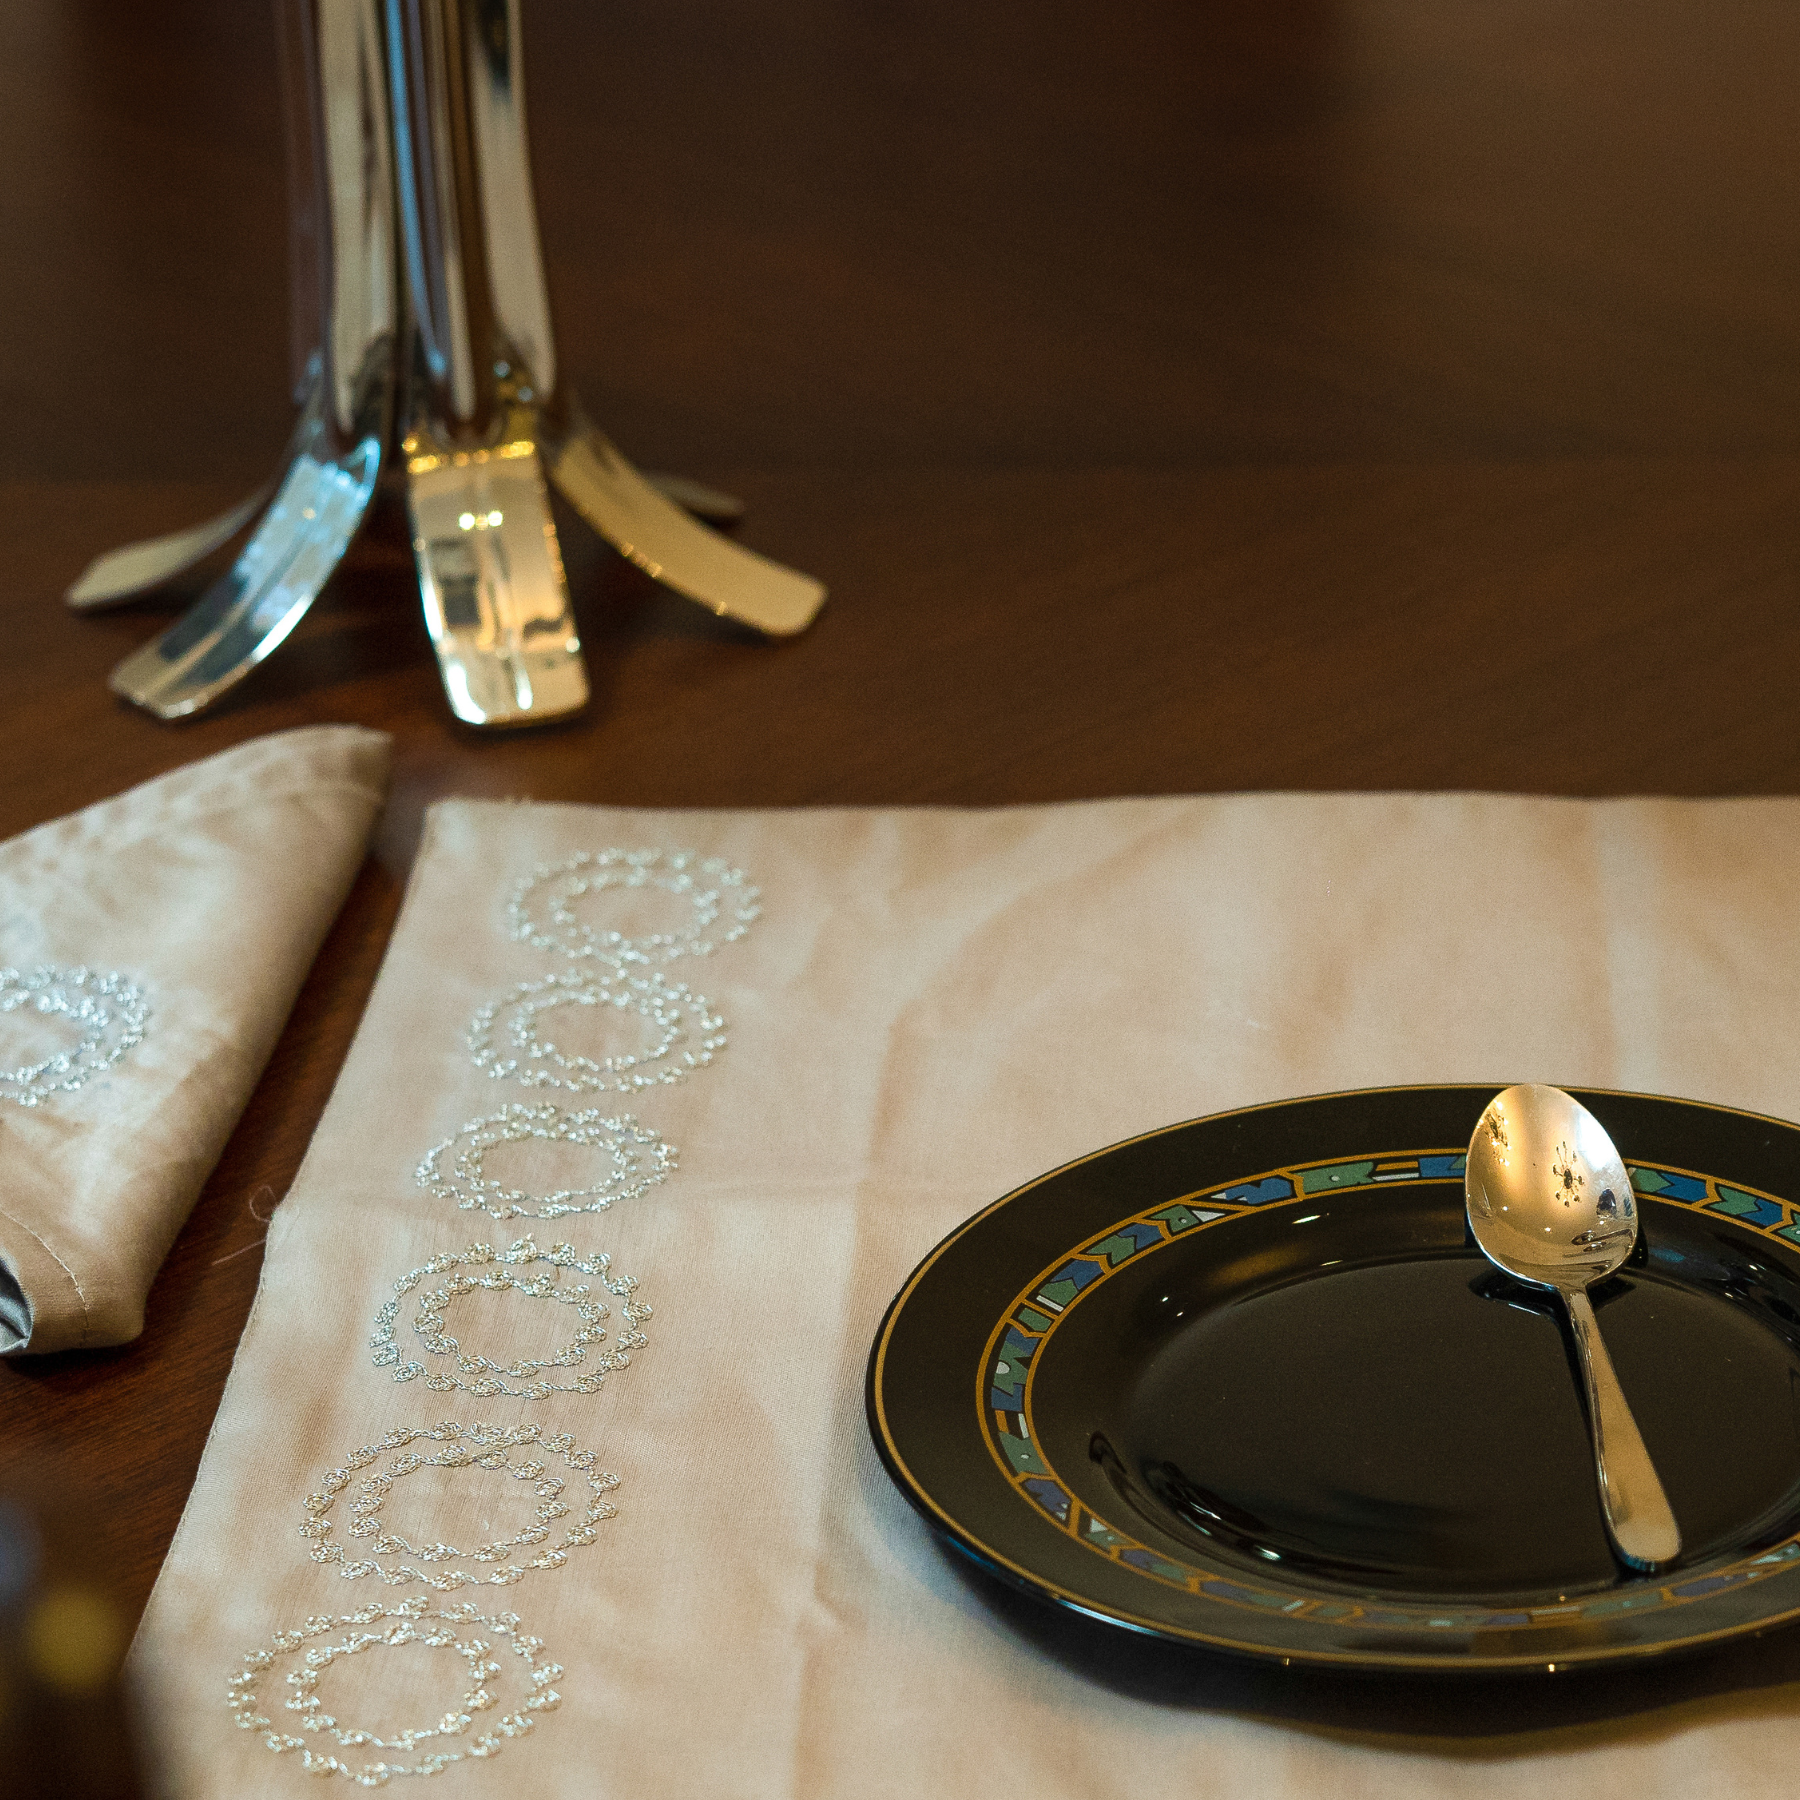 The Luxelife Signature Placemats